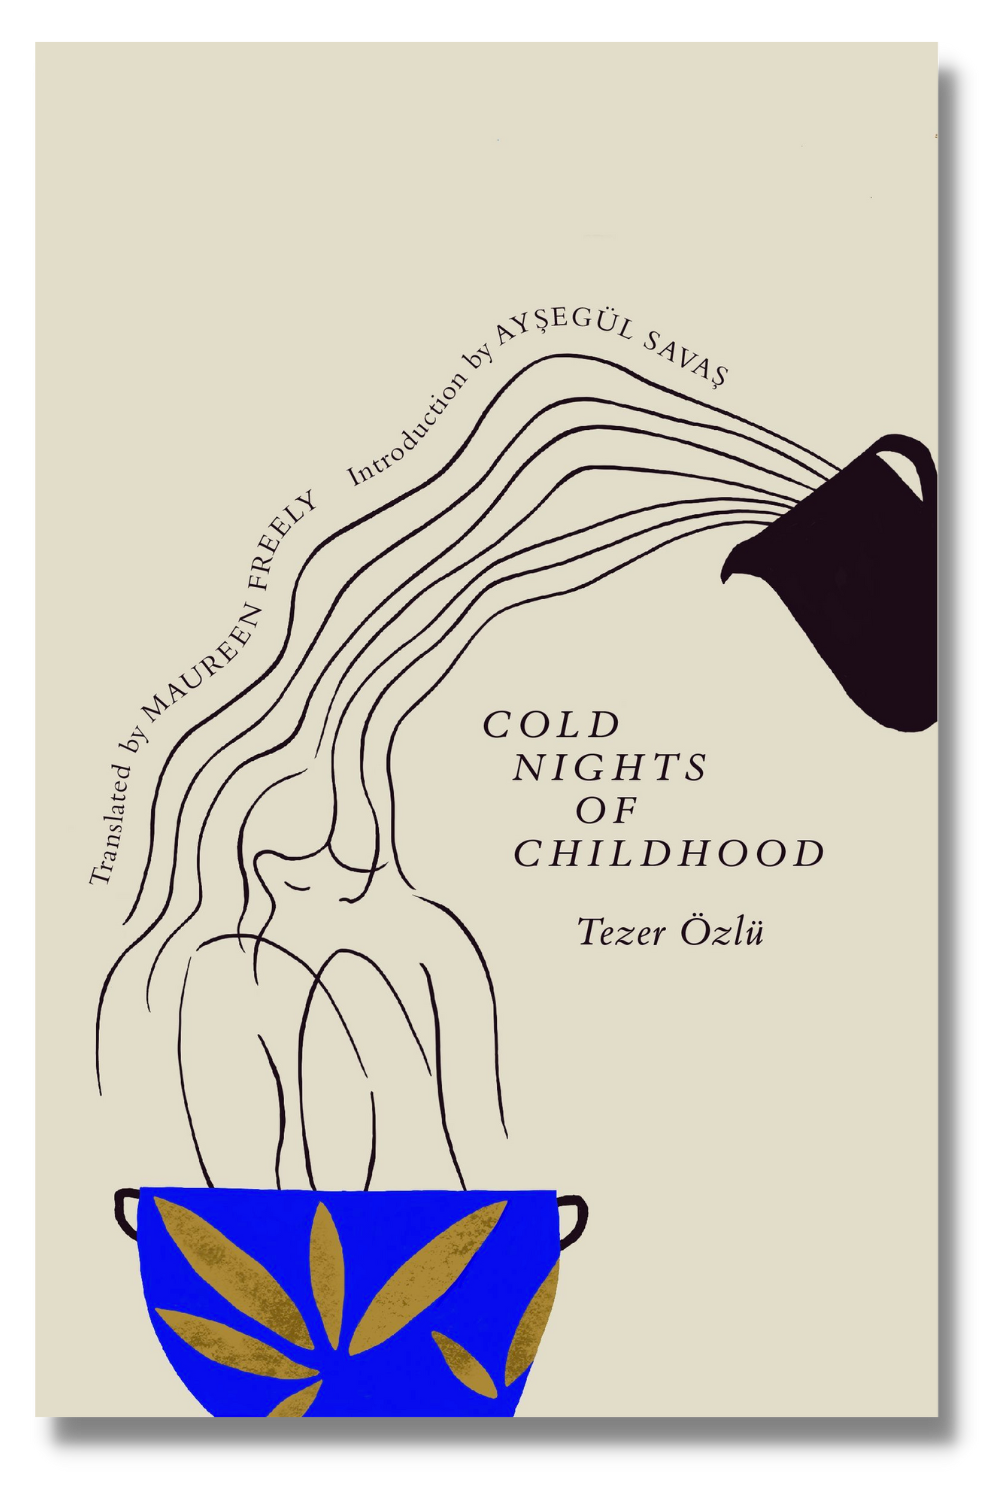 The cover of "Cold Nights of Childhood"